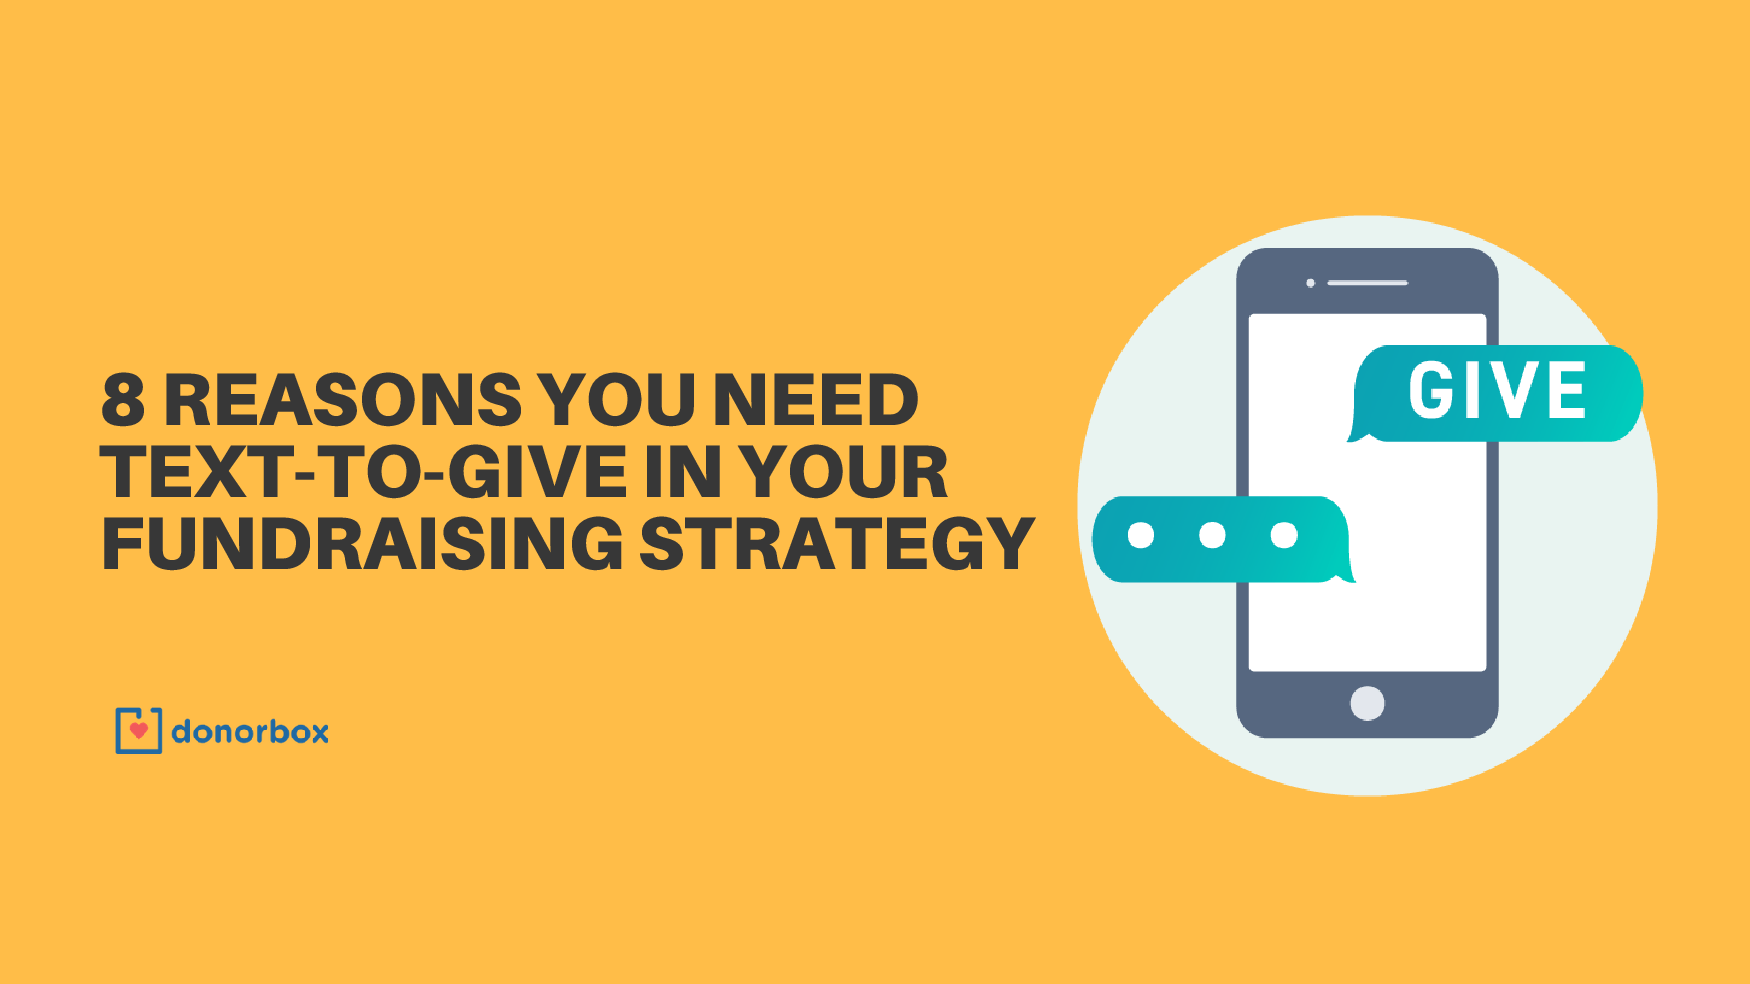 8 Reasons You Need Text-to-Give in your Fundraising Strategy